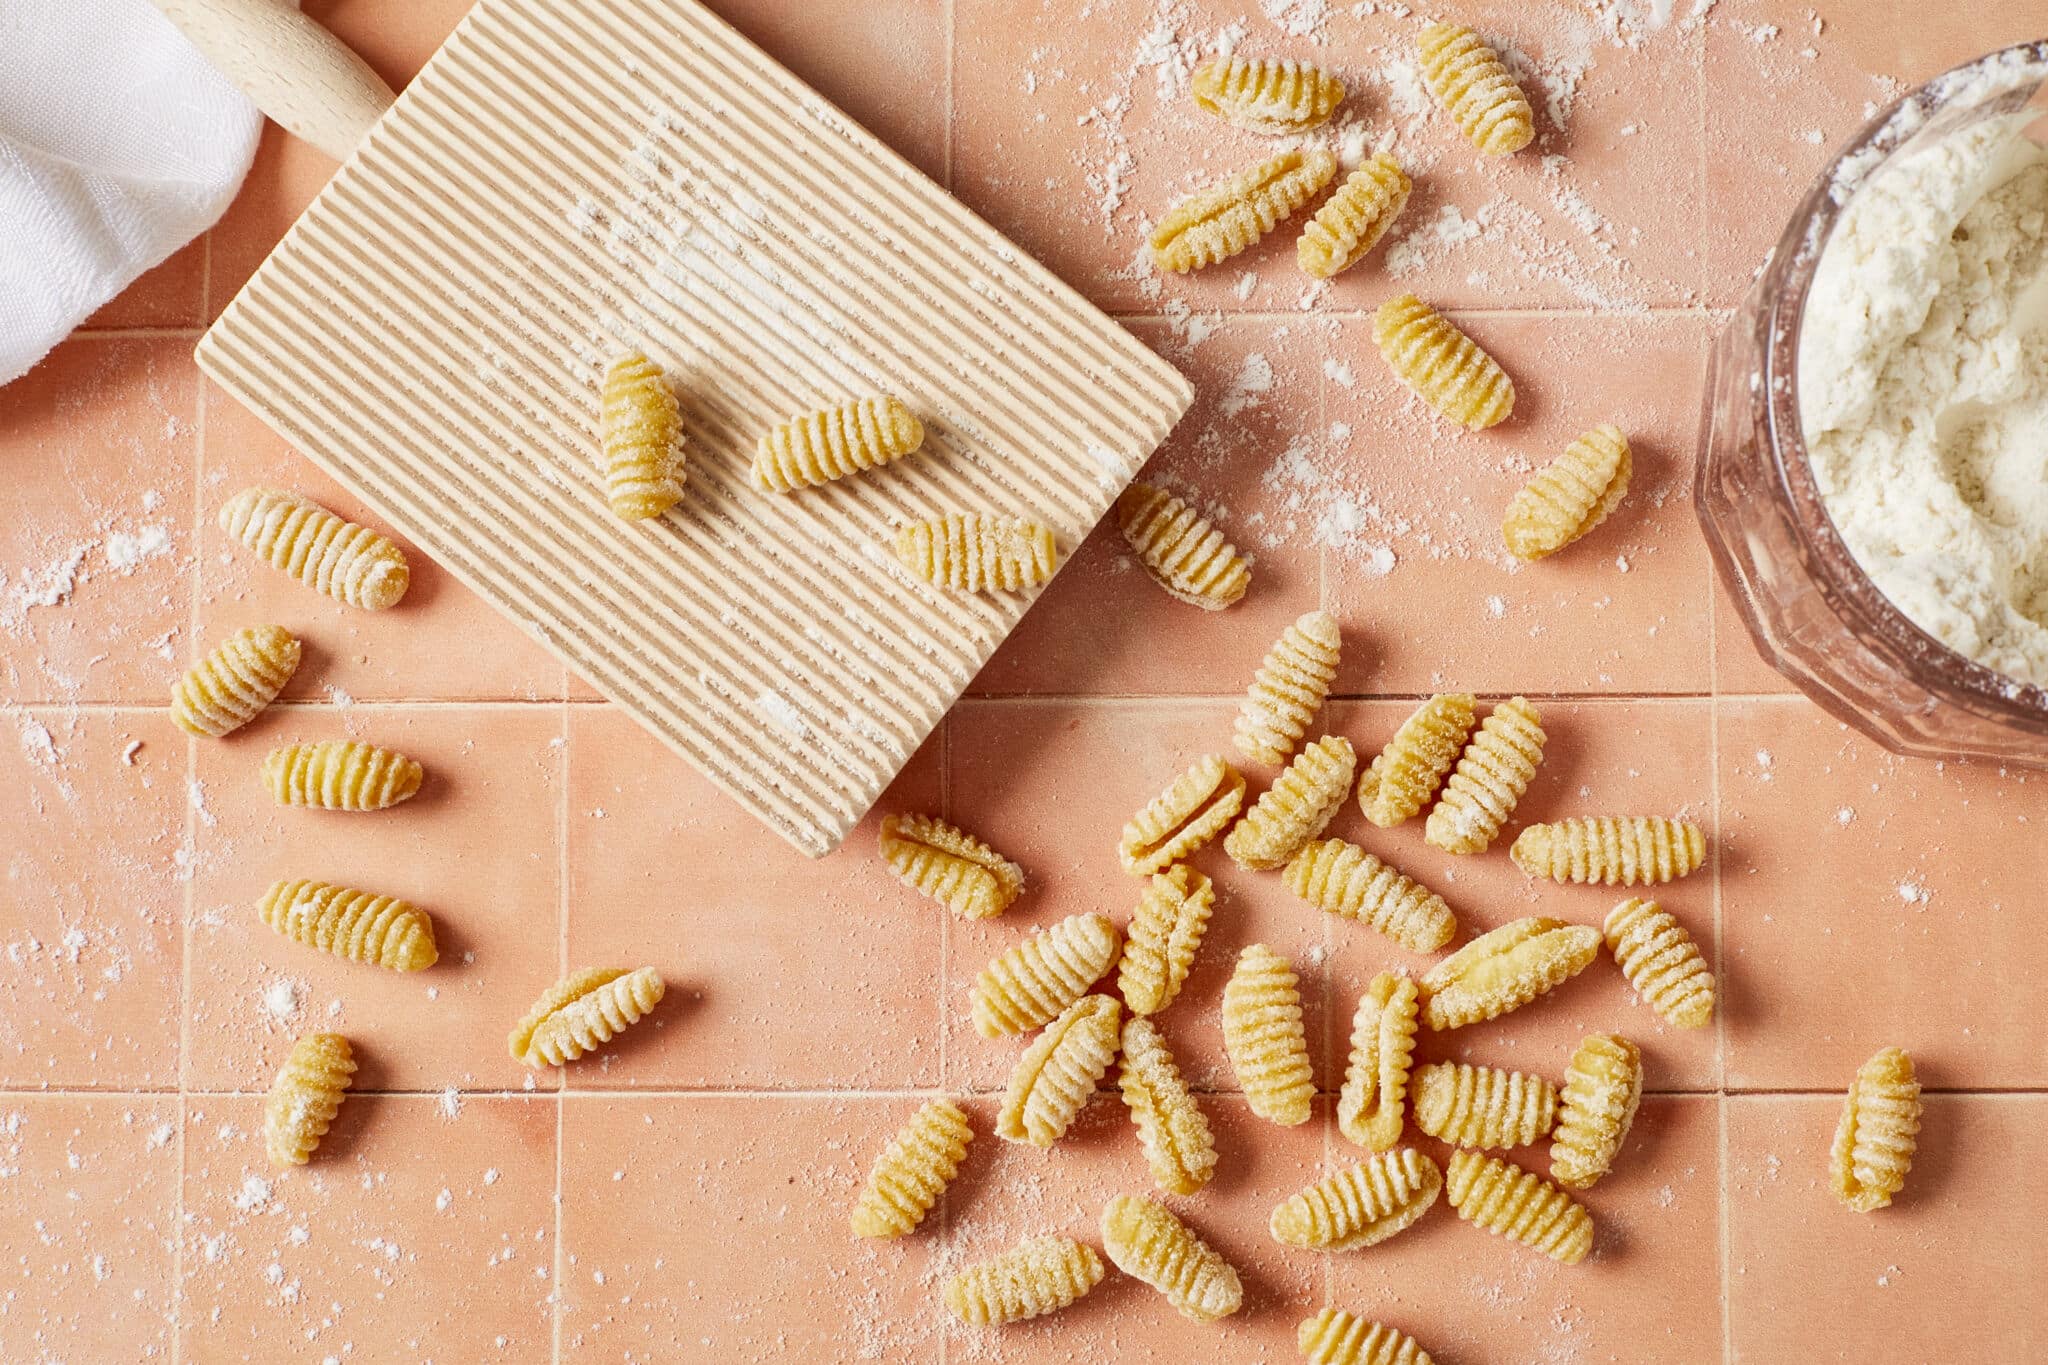 Malloreddus Pasta (Gnocchetti Sardi) is placed around a gnocchi board with 3 pieces on it. Malloreddus is shaped into small, elongated shells with a slightly curved shape. A glass bowl of flour is on the side.